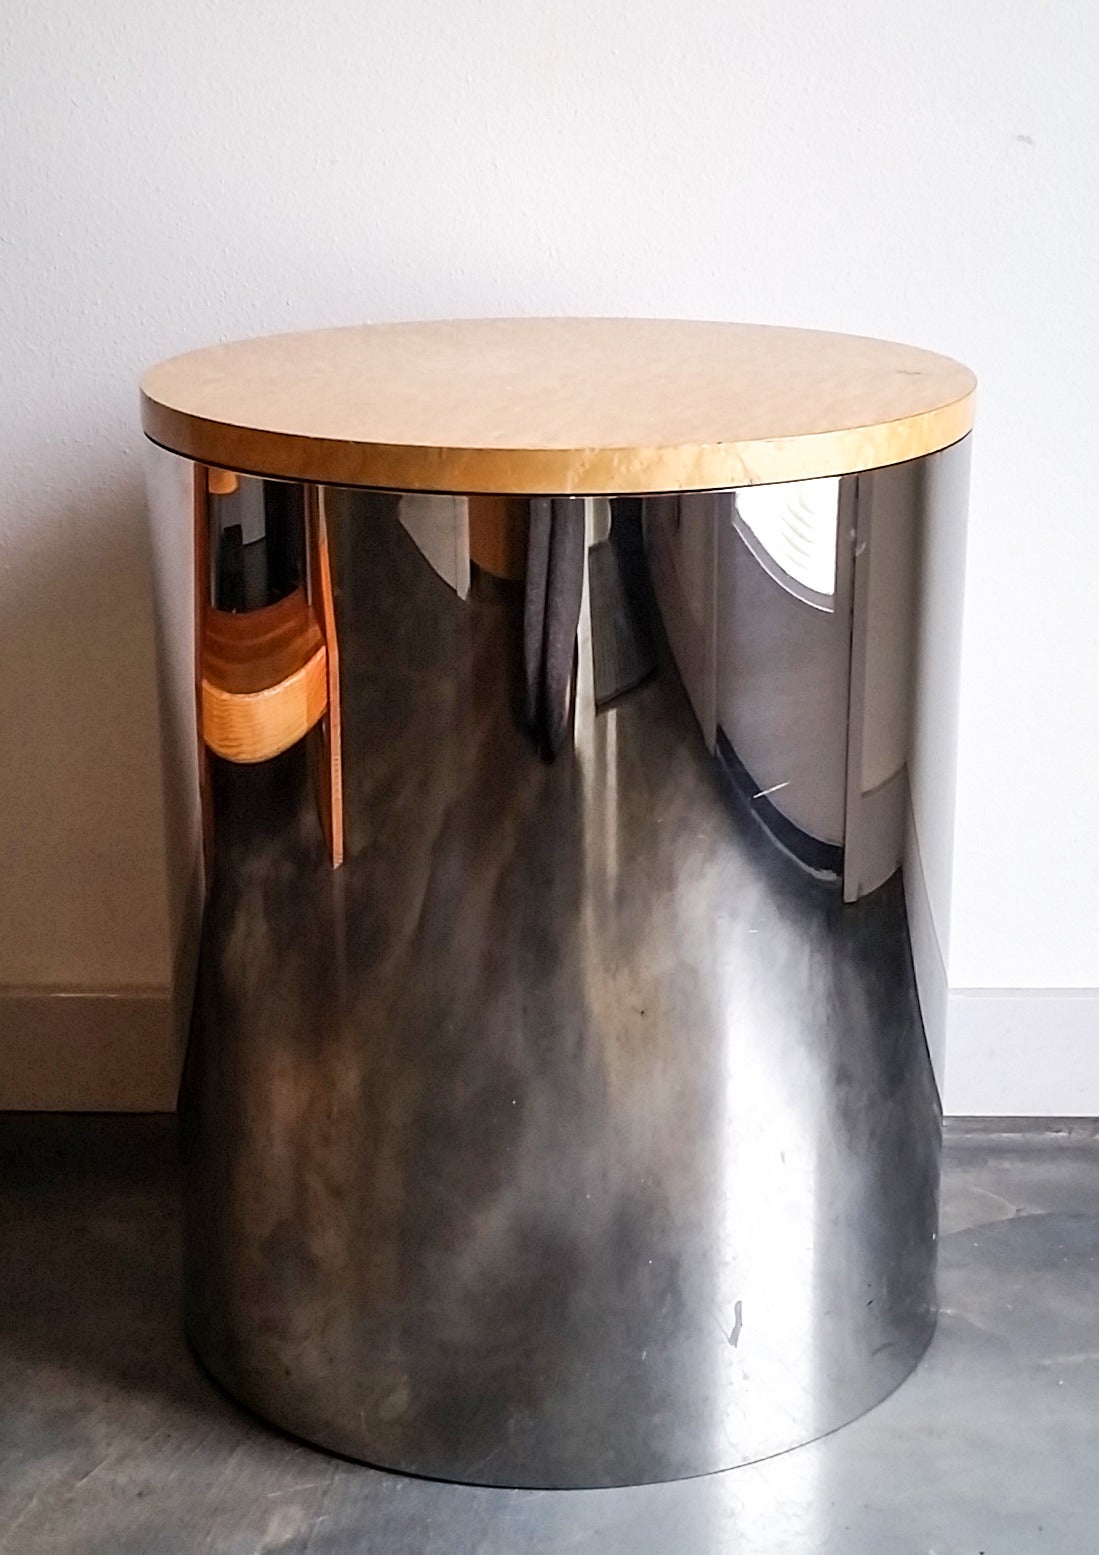 Paul Mayen for Habitat cylindrical chrome and bird's-eye maple side table, this is truly stunning example of Mid-Century Modern design. This cylindrical drum style cocktail table is extremely versatile and could also be used as a pedestal or artwork